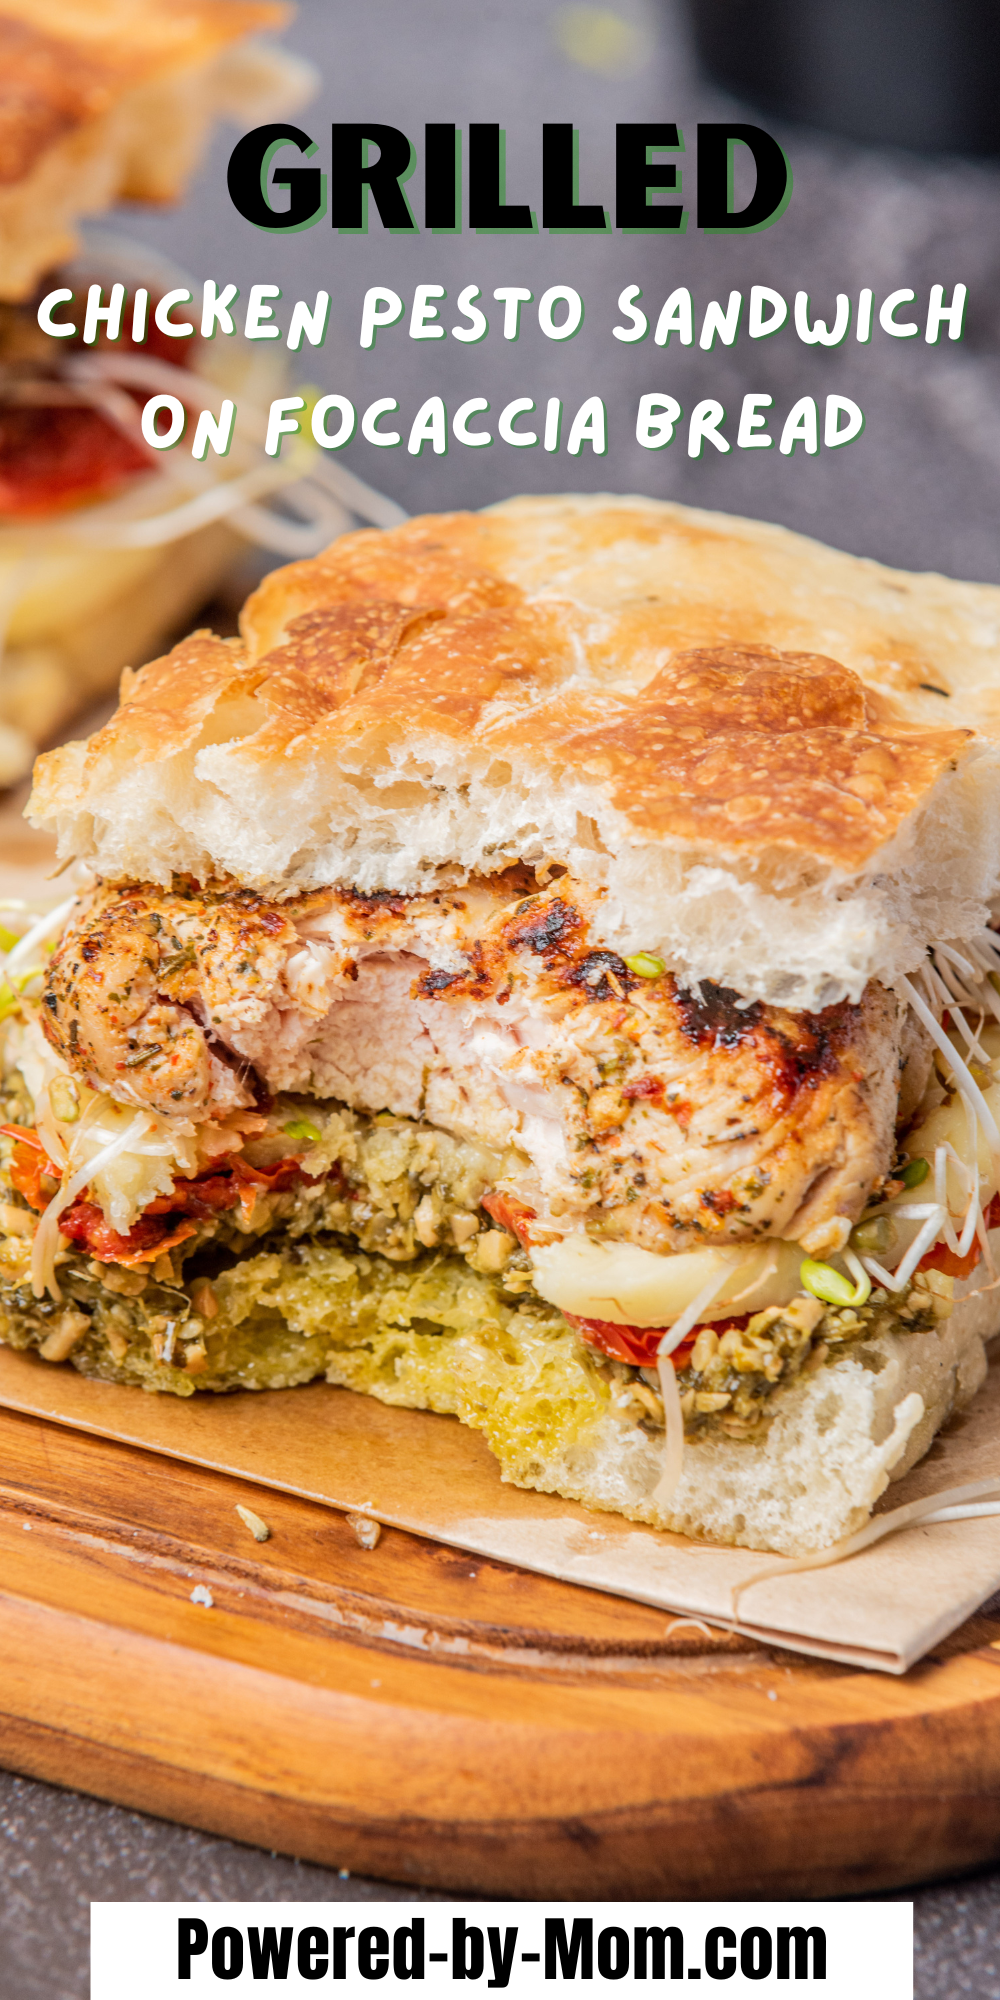 Enjoy this delicious grilled chicken pesto sandwich topped with melted mozzarella cheese, sundried tomatoes, basil pesto and arugula (or sprouts) on yummy focaccia bread. This pesto chicken sandwich is perfect those backyard gatherings or any occasion. 